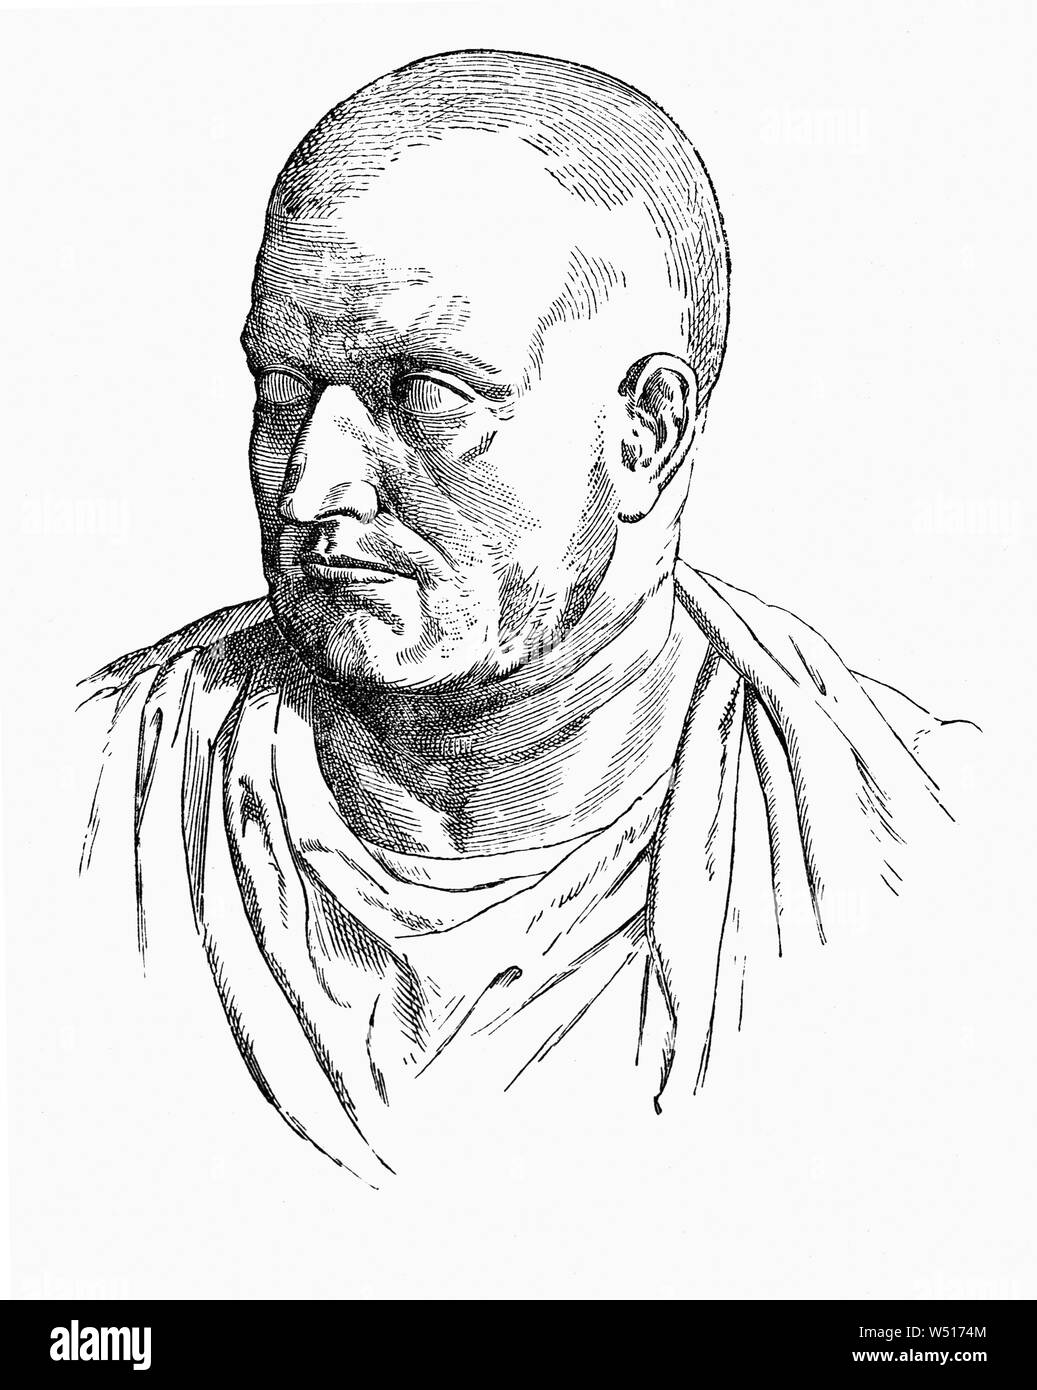 A portrait of Publius Cornelius , (died 211 BCE), Roman general, consul provincial governor and a commander of the Roman expeditionary force in Spain, where he was sent to stop the Carthaginian general Hannibal. Delayed by a Gallic revolt in Cisalpine Gaul (northern Italy), Publius arrived at the Rhône River too late to prevent Hannibal’s crossing in 218. Later Scipio and his brother won important naval and land battles and inflicted severe losses on the enemy and it took three armies to defeat them, yet the three victorious Carthaginian generals could not agree on a plan to advance on Italy, Stock Photo